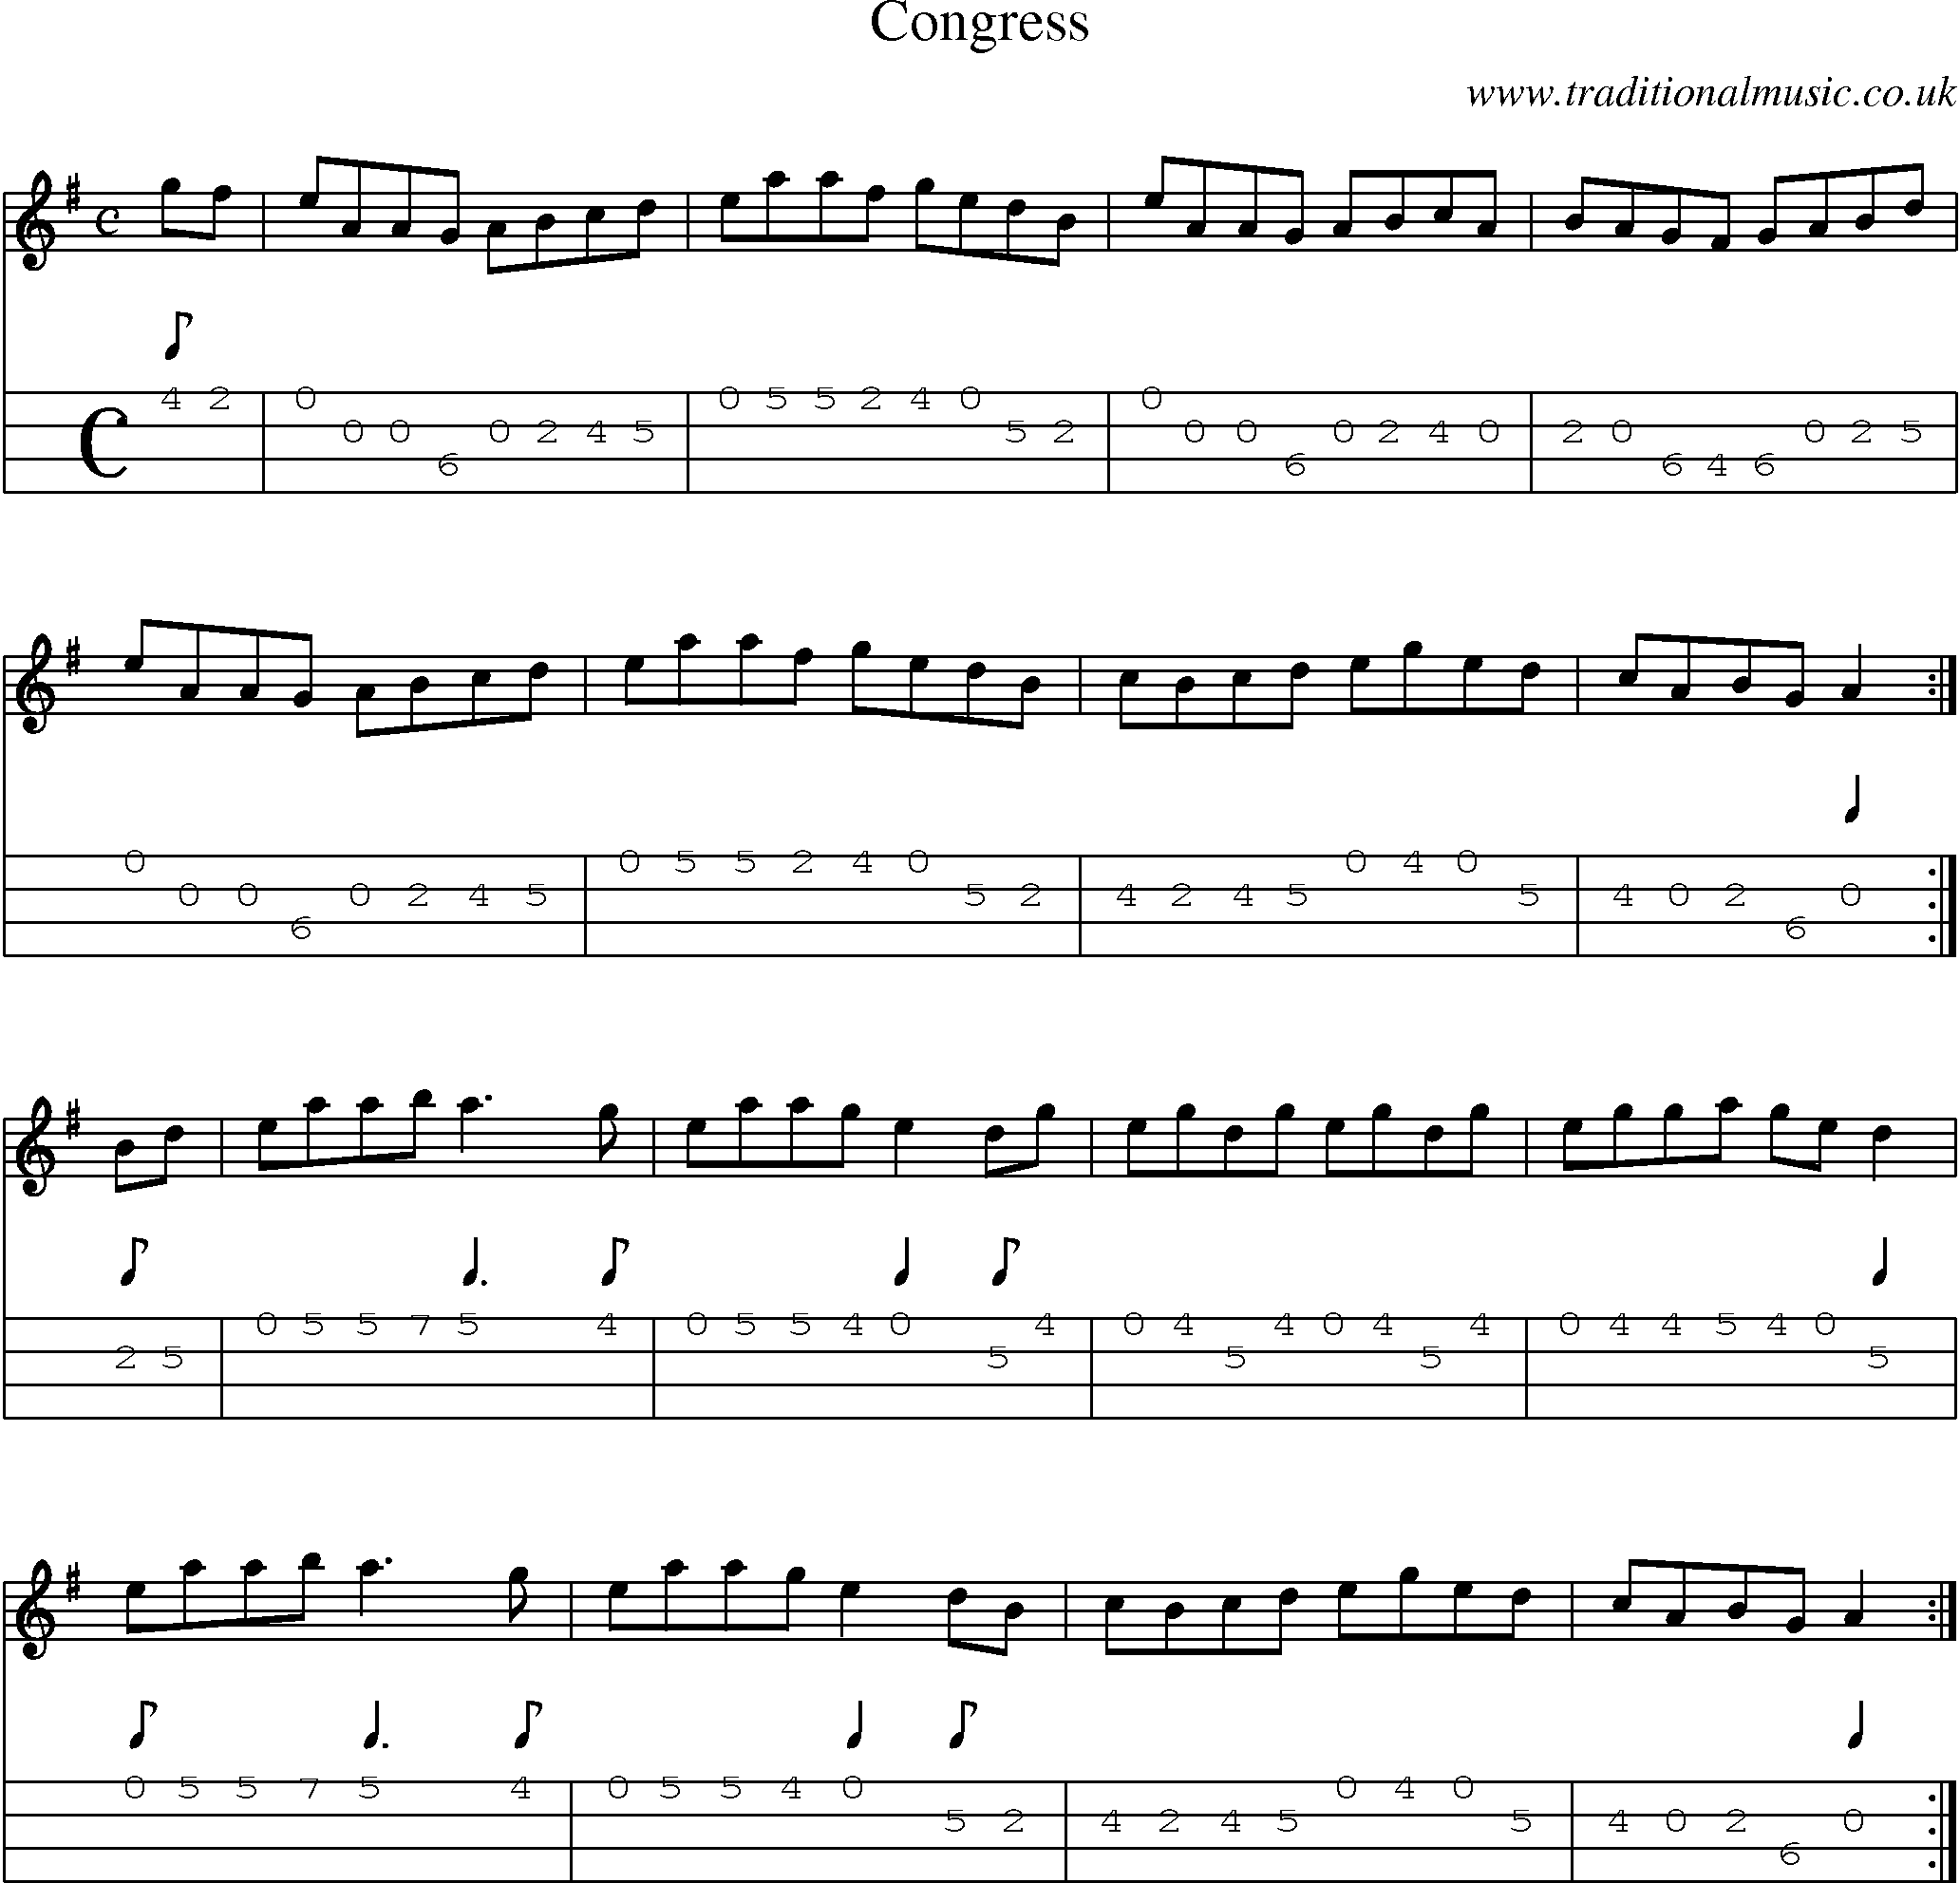 Music Score and Mandolin Tabs for Congress